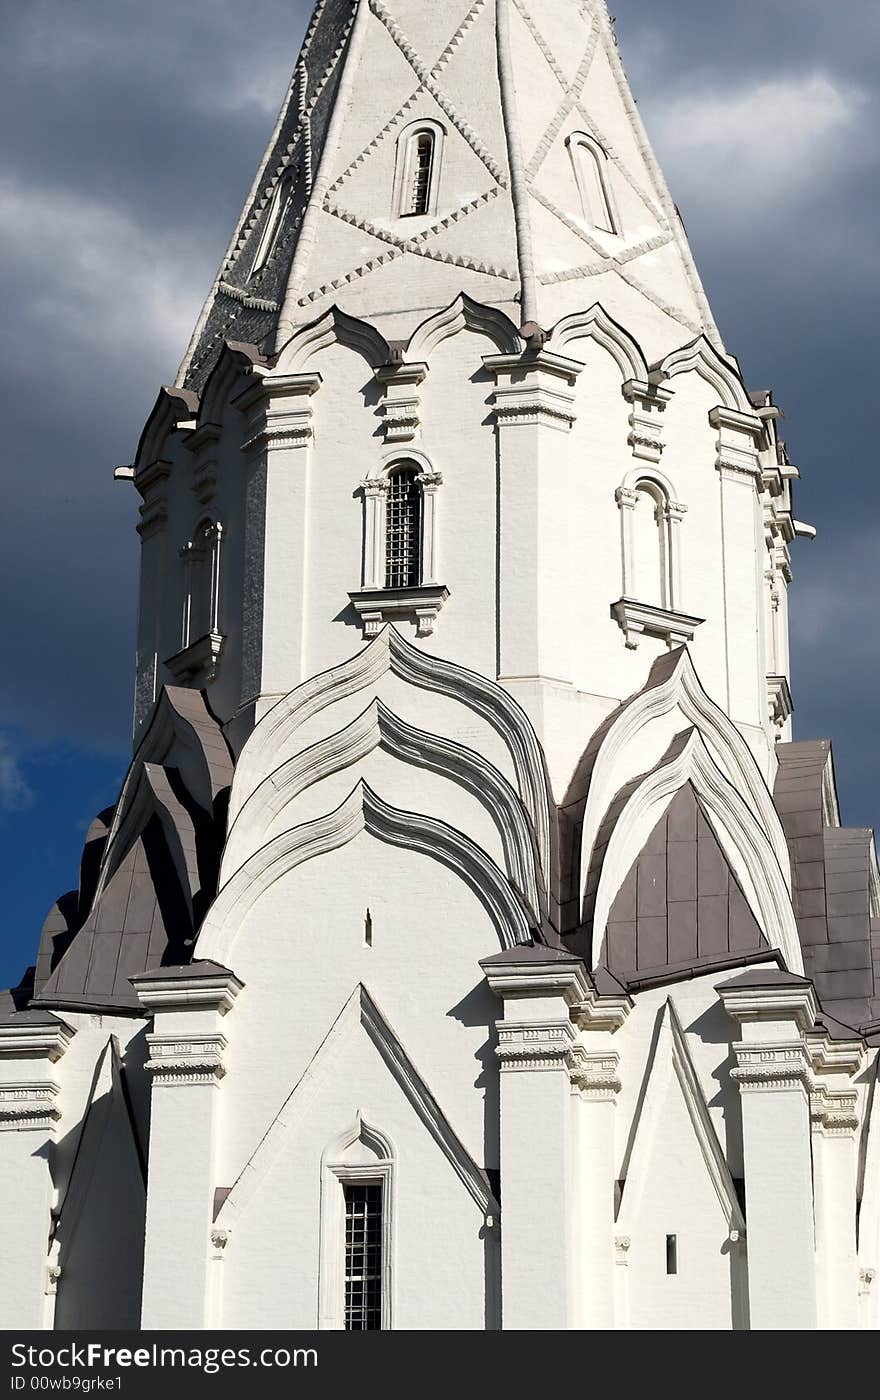 Church of Ascension in Kolomenskoye, Moscow, Russia (detail). Church of Ascension in Kolomenskoye, Moscow, Russia (detail)